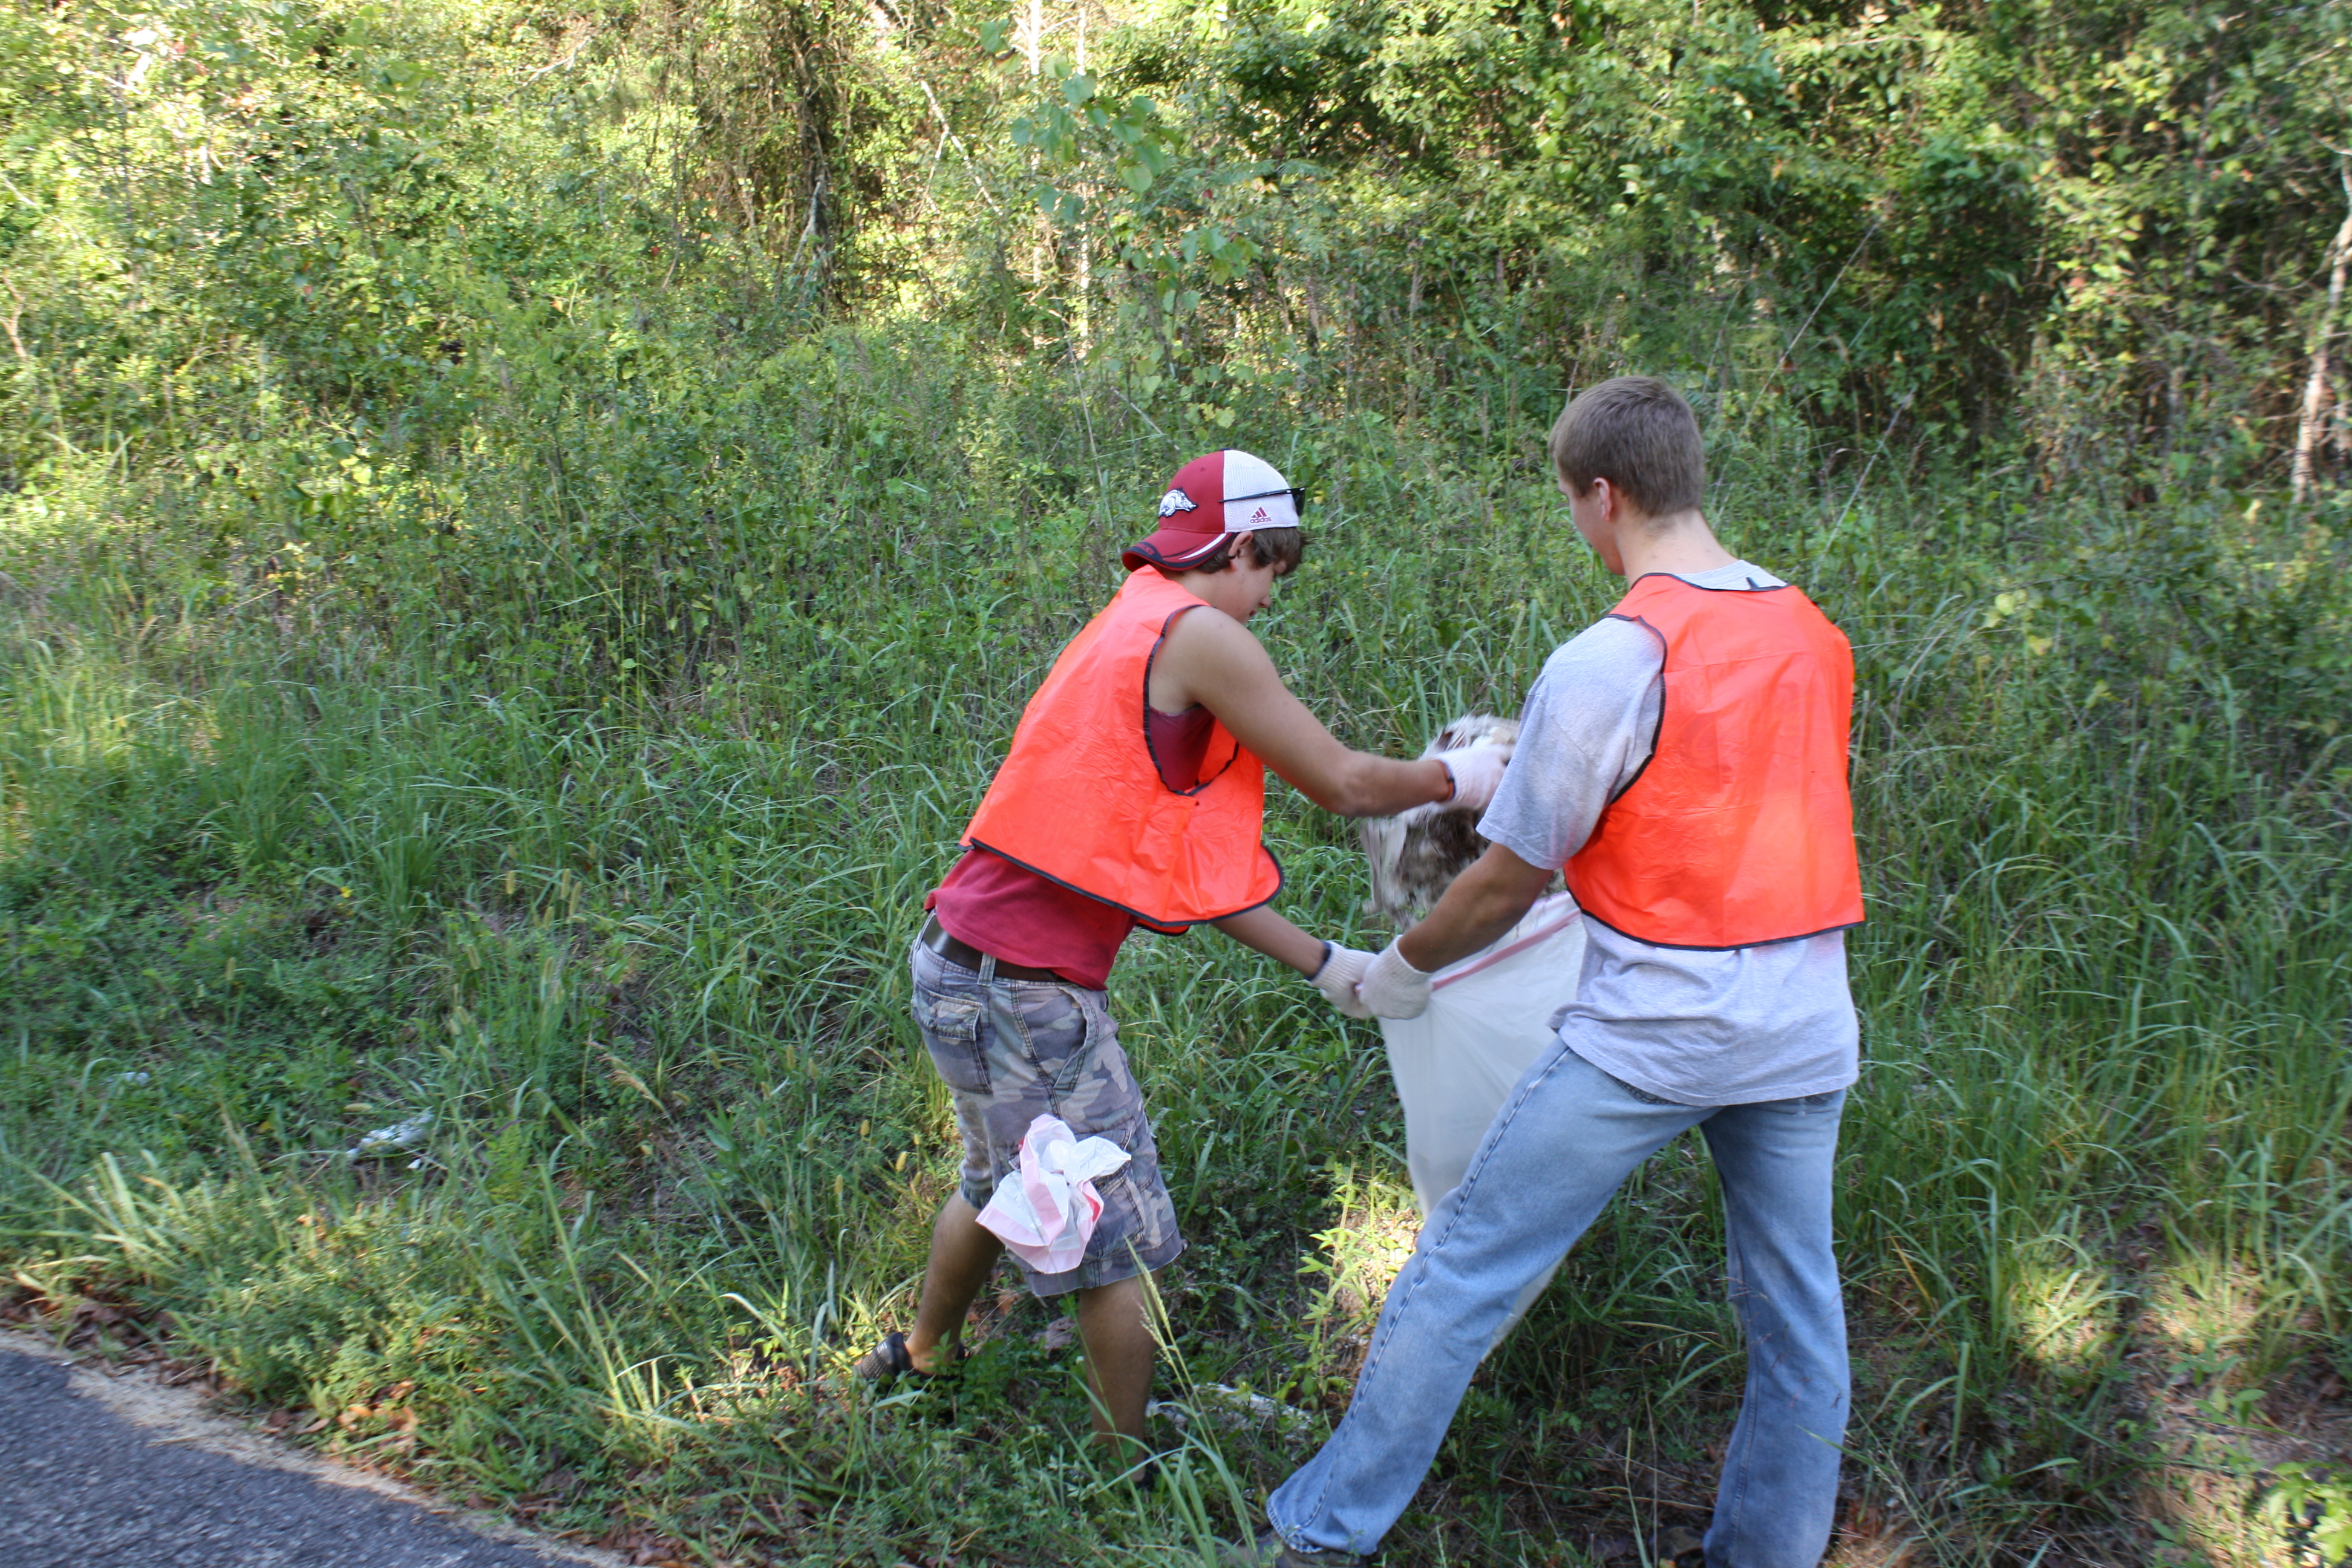 Volunteers picking up trash during the Annual Great Arkansas Cleanup held at Nimrod Lake each year.